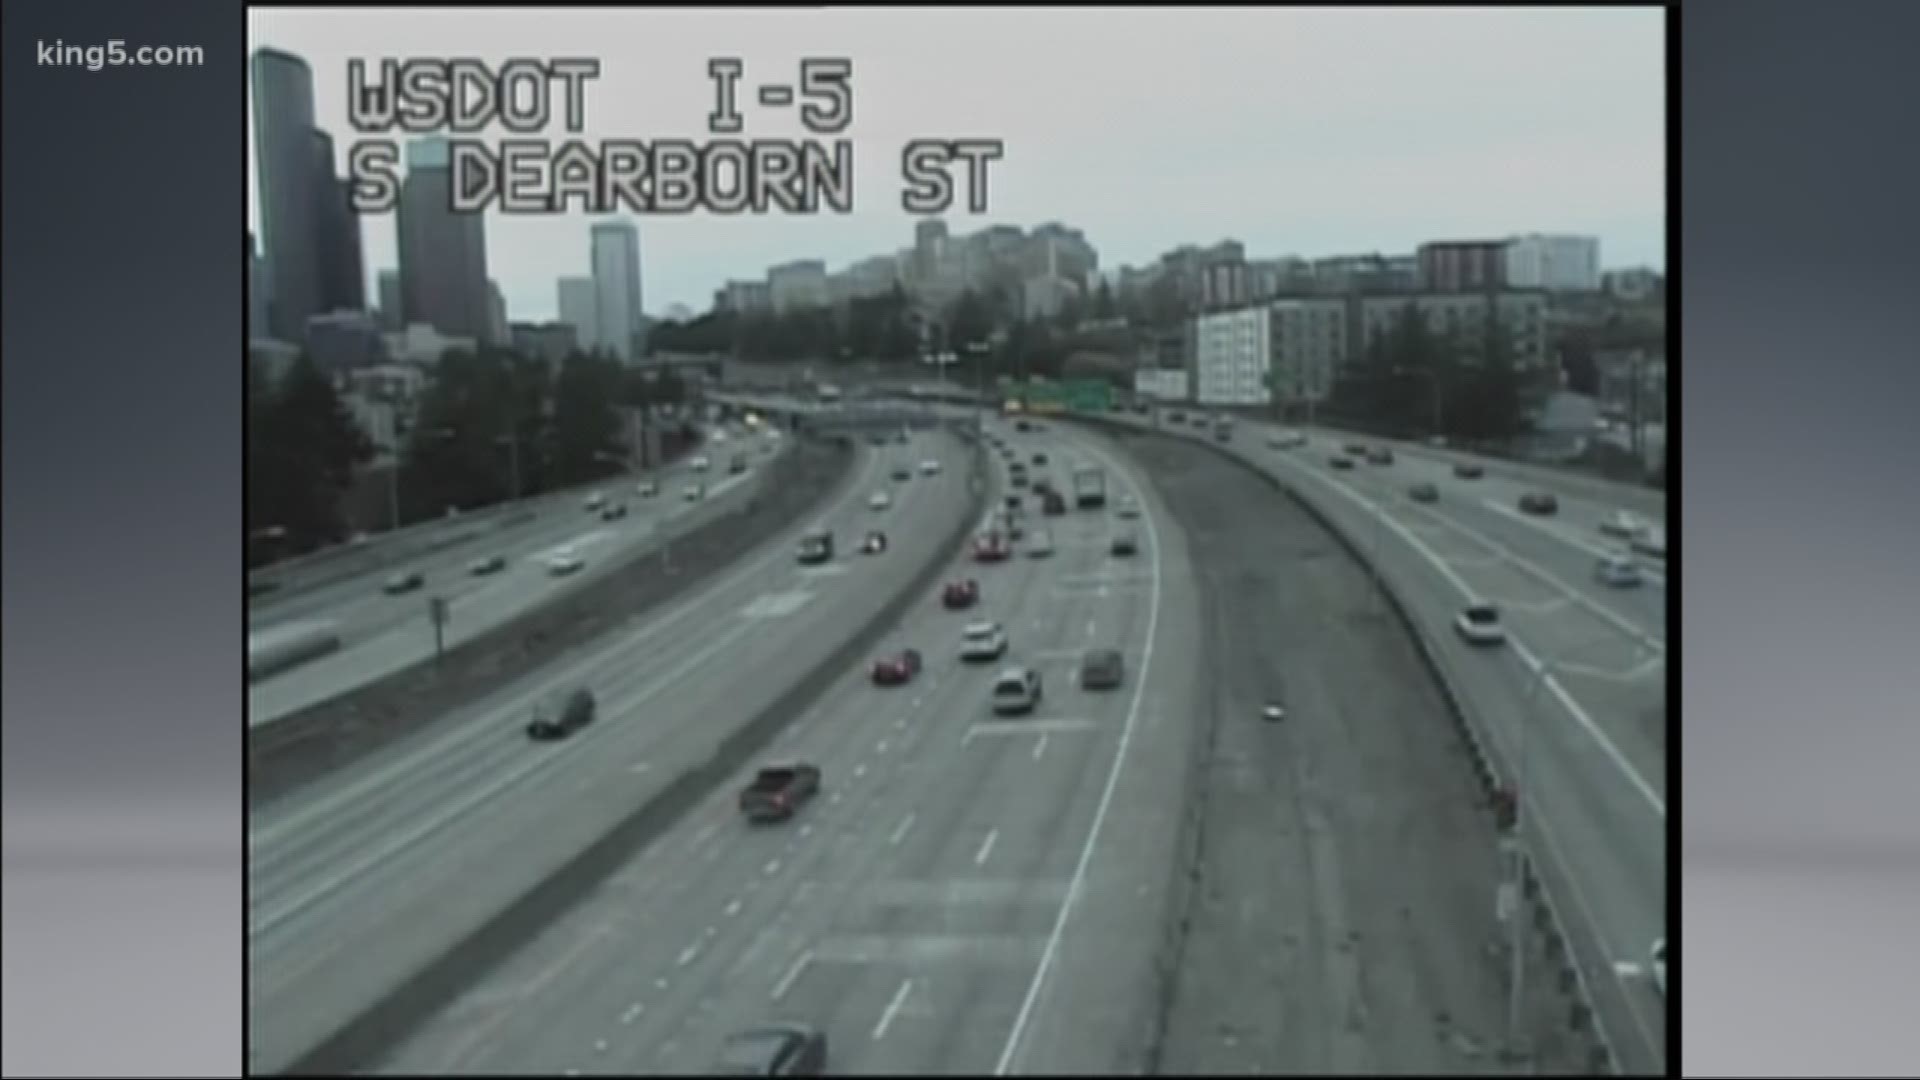 Drivers should expect to see late night construction work on I-5 S through downtown Seattle.